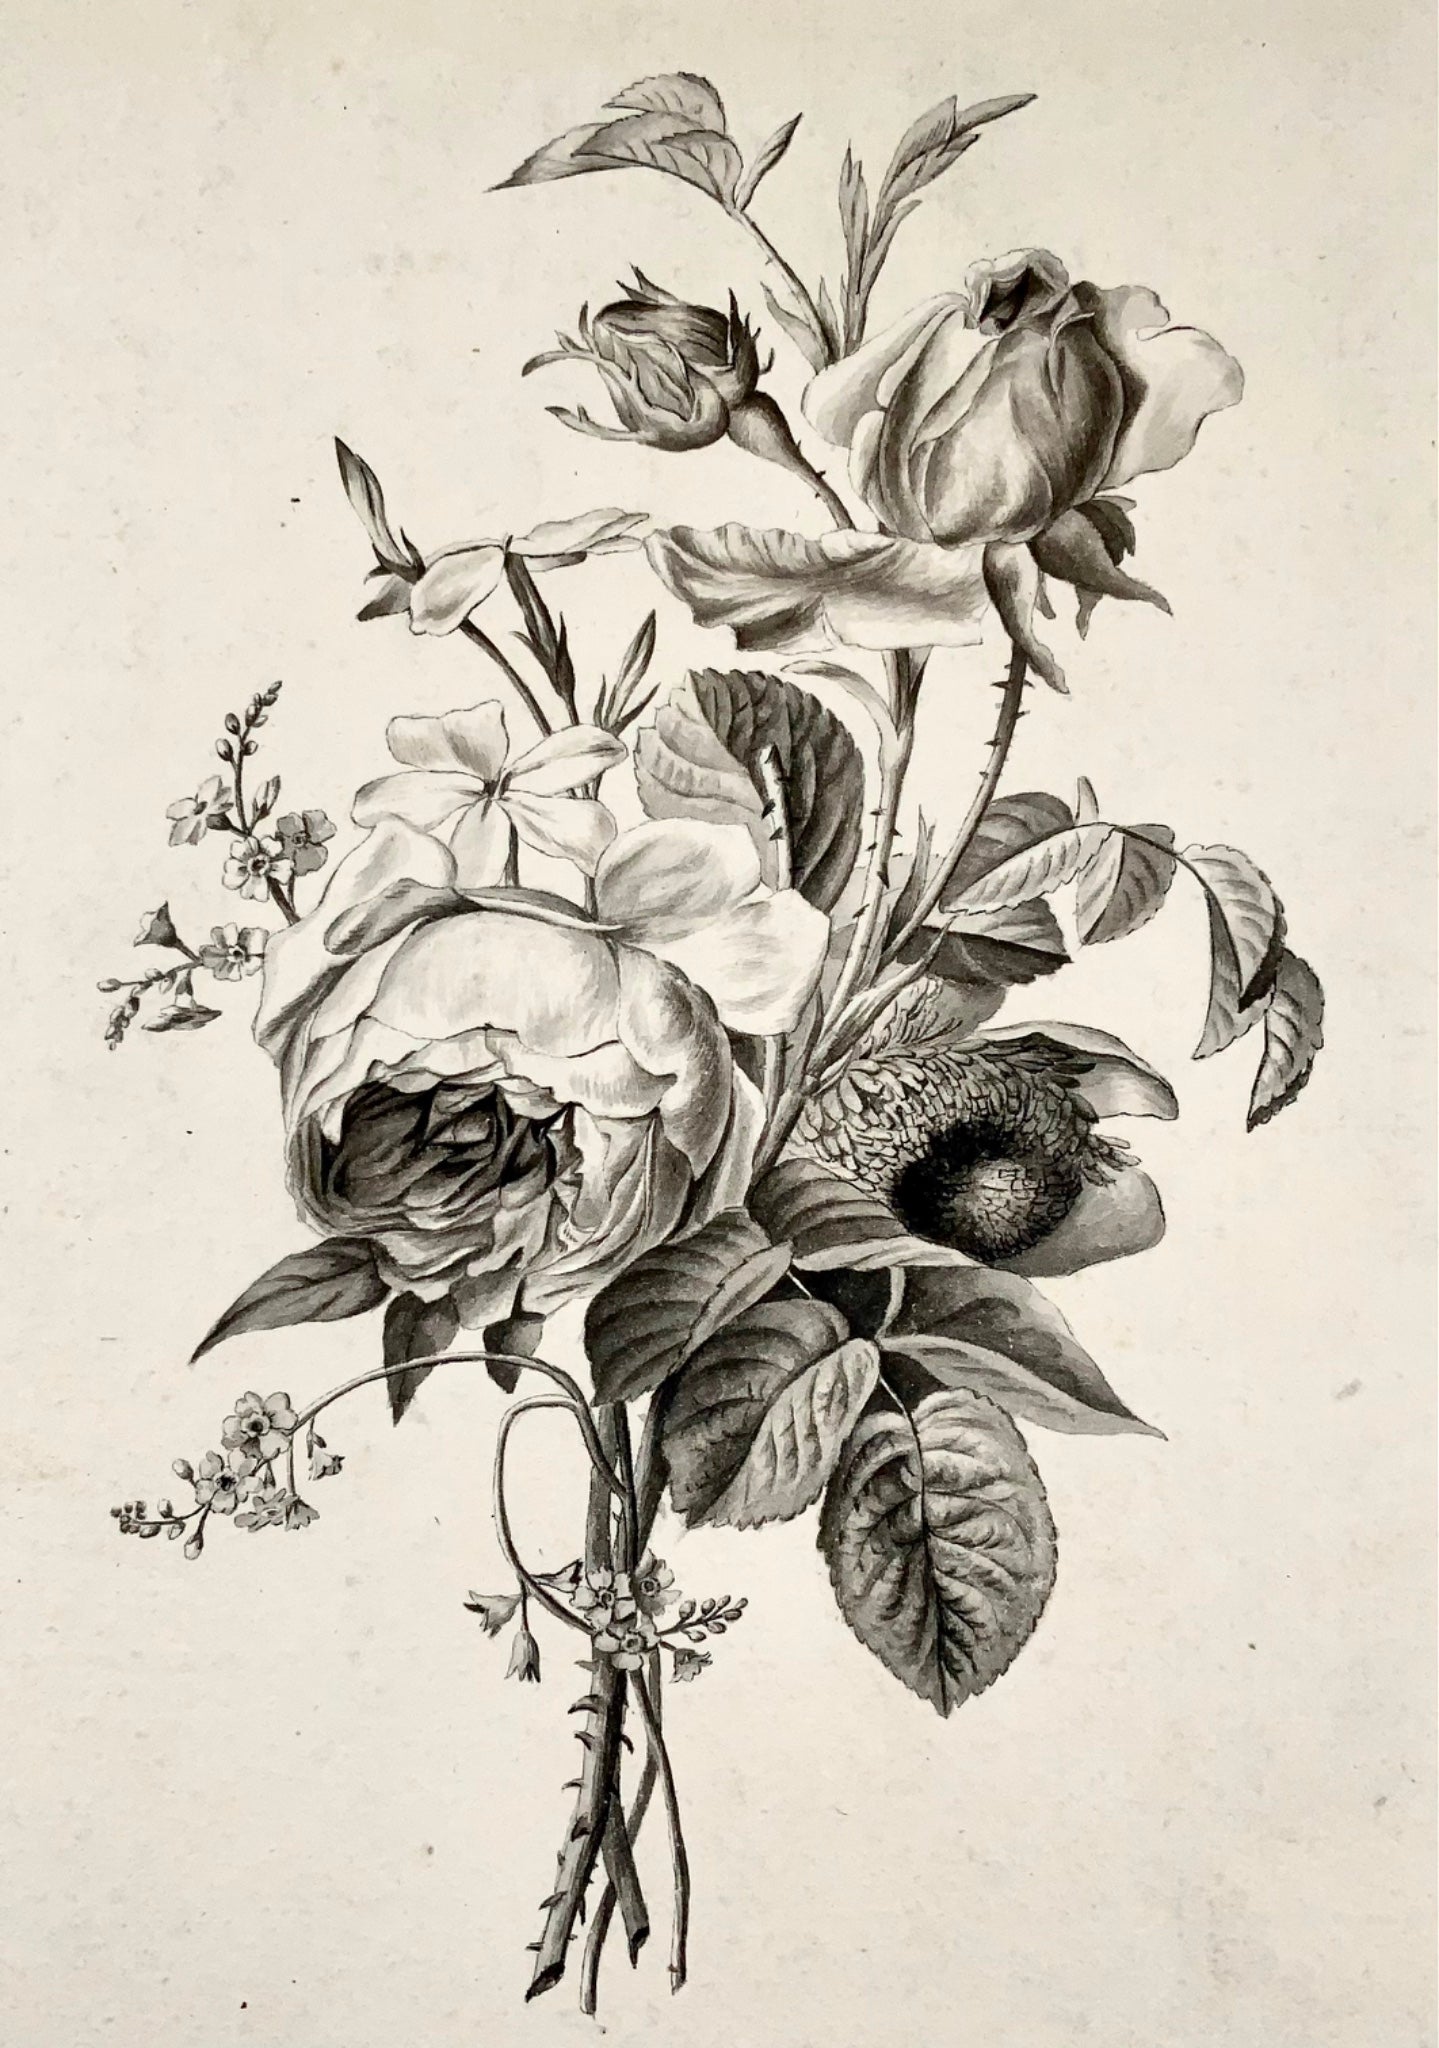 Jean-Baptist Huet, the younger [(1772-1852) attrib.], Bouquet Flowers pen & wash, flowers and botany